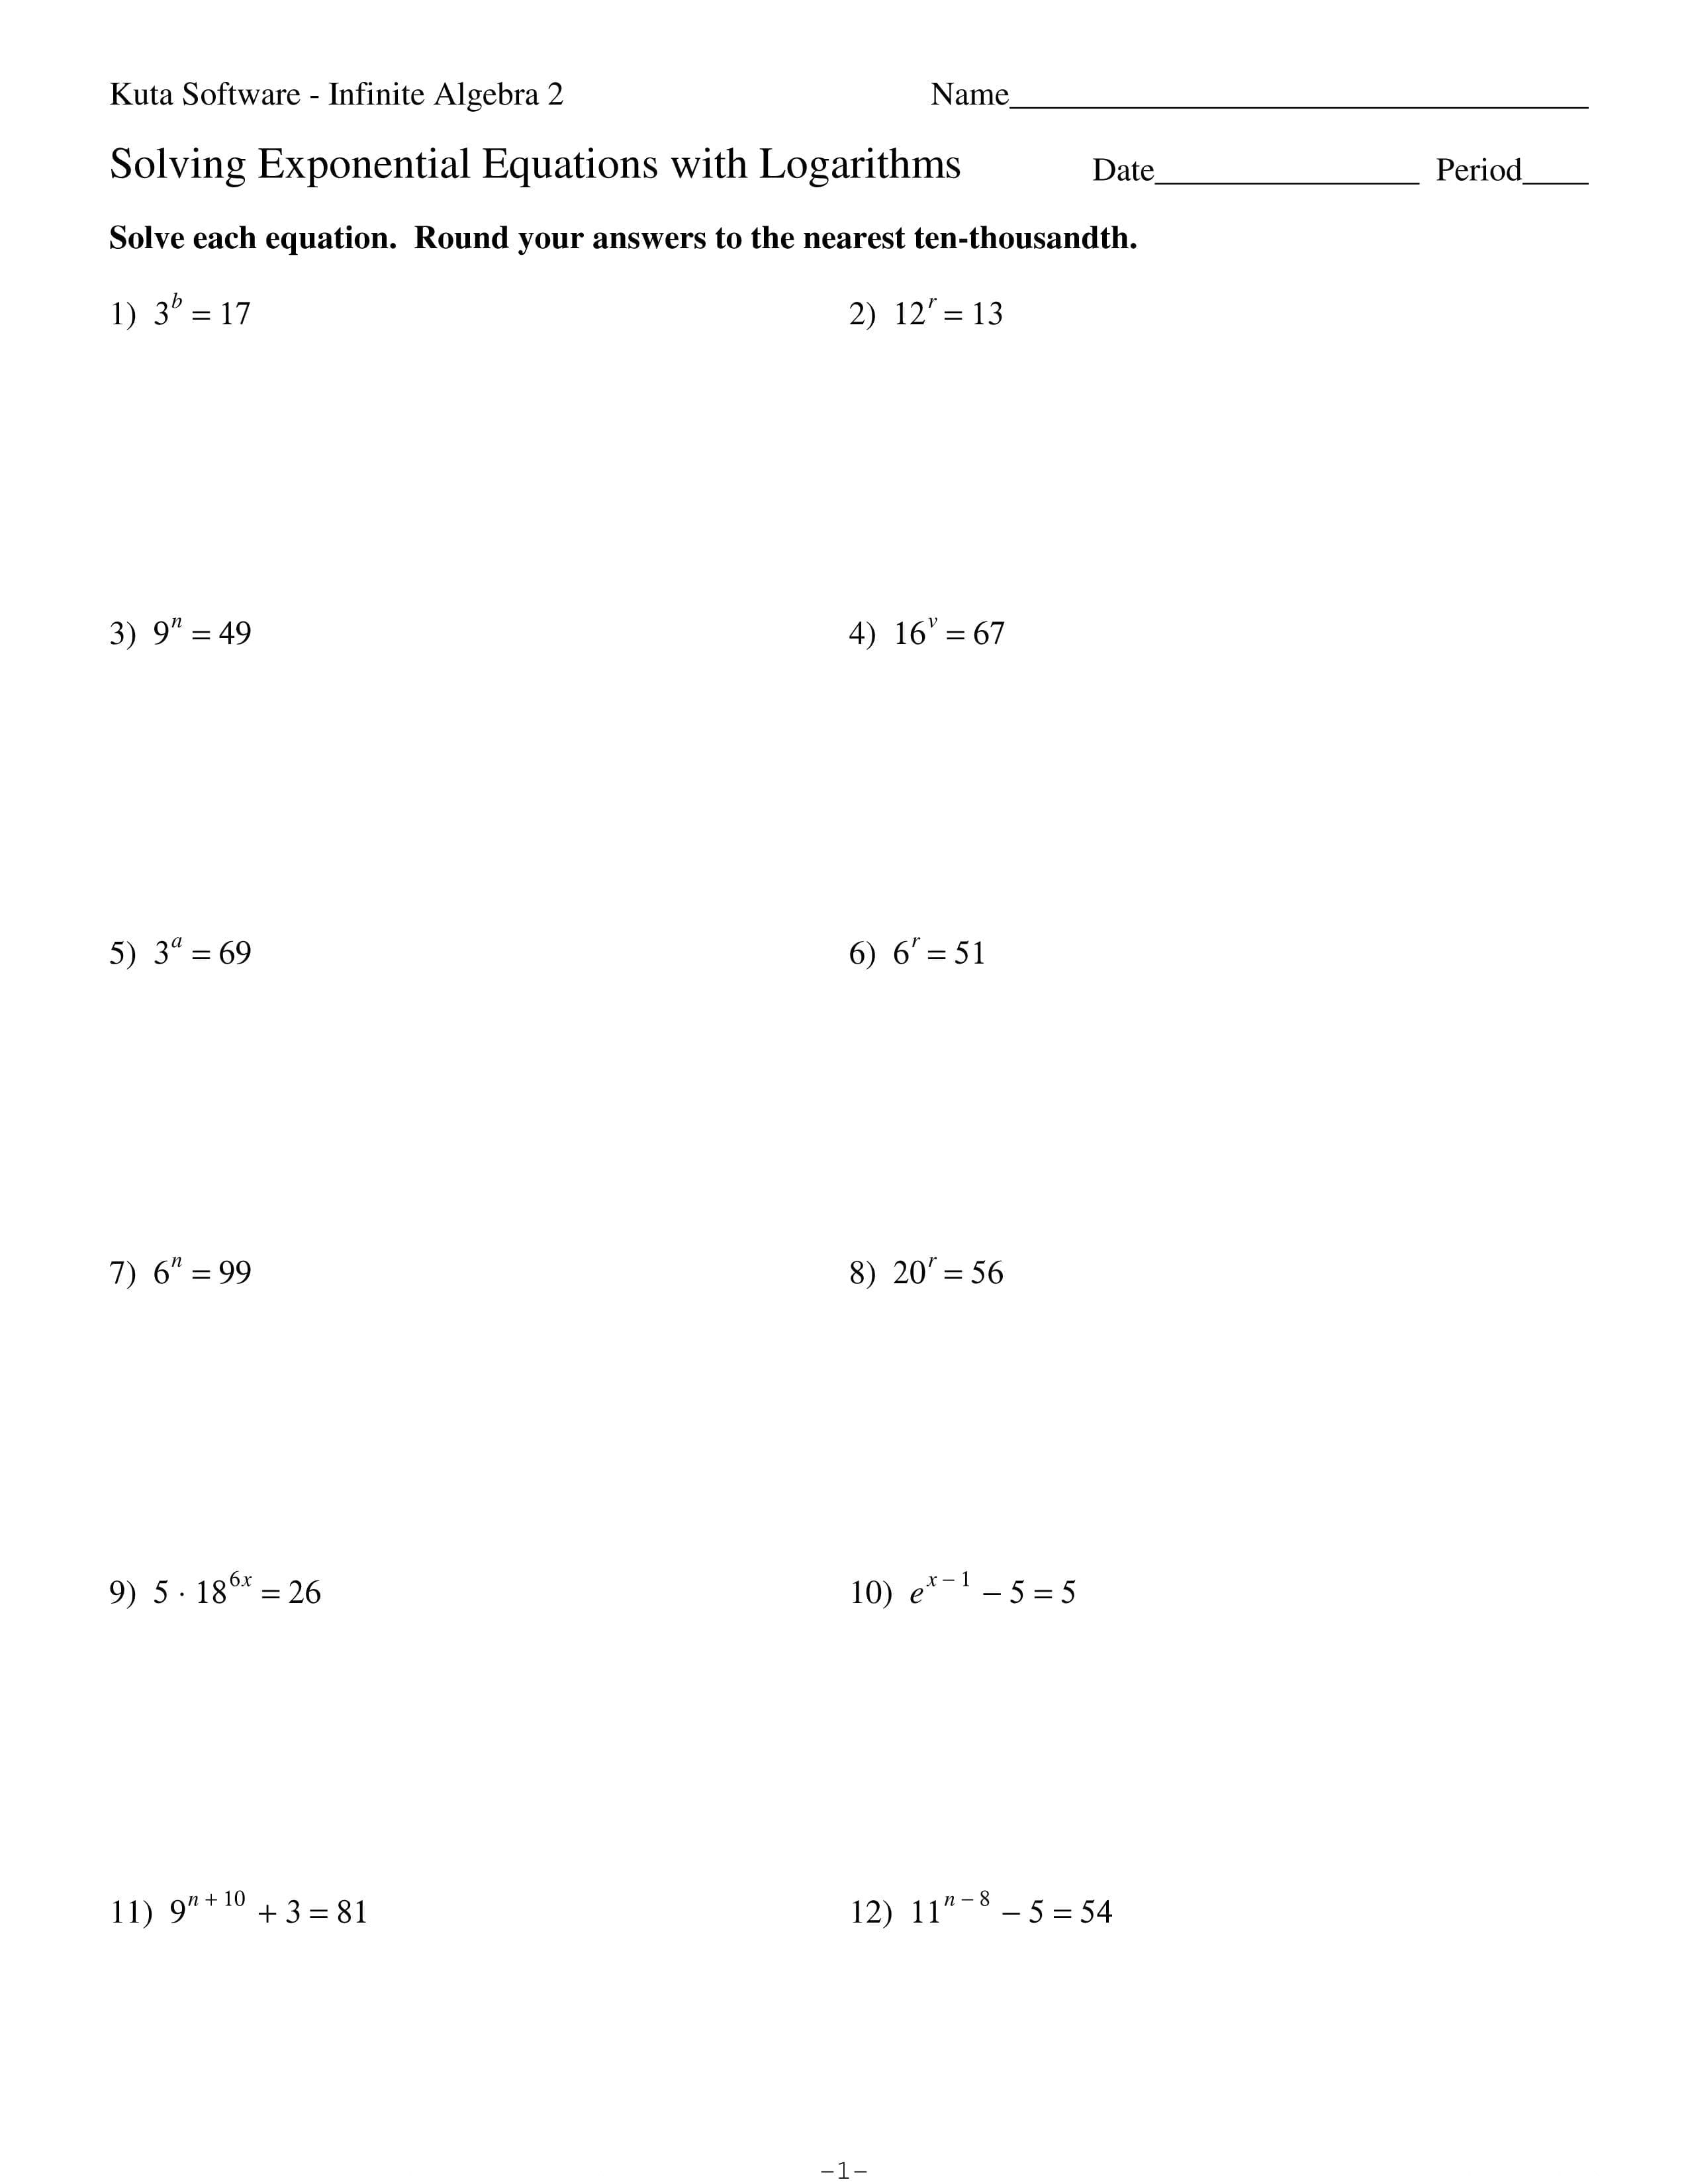 Hw Solving Exponential Equations With Logarithms  Algebra Pertaining To Solving Exponential Equations With Logarithms Worksheet Answers